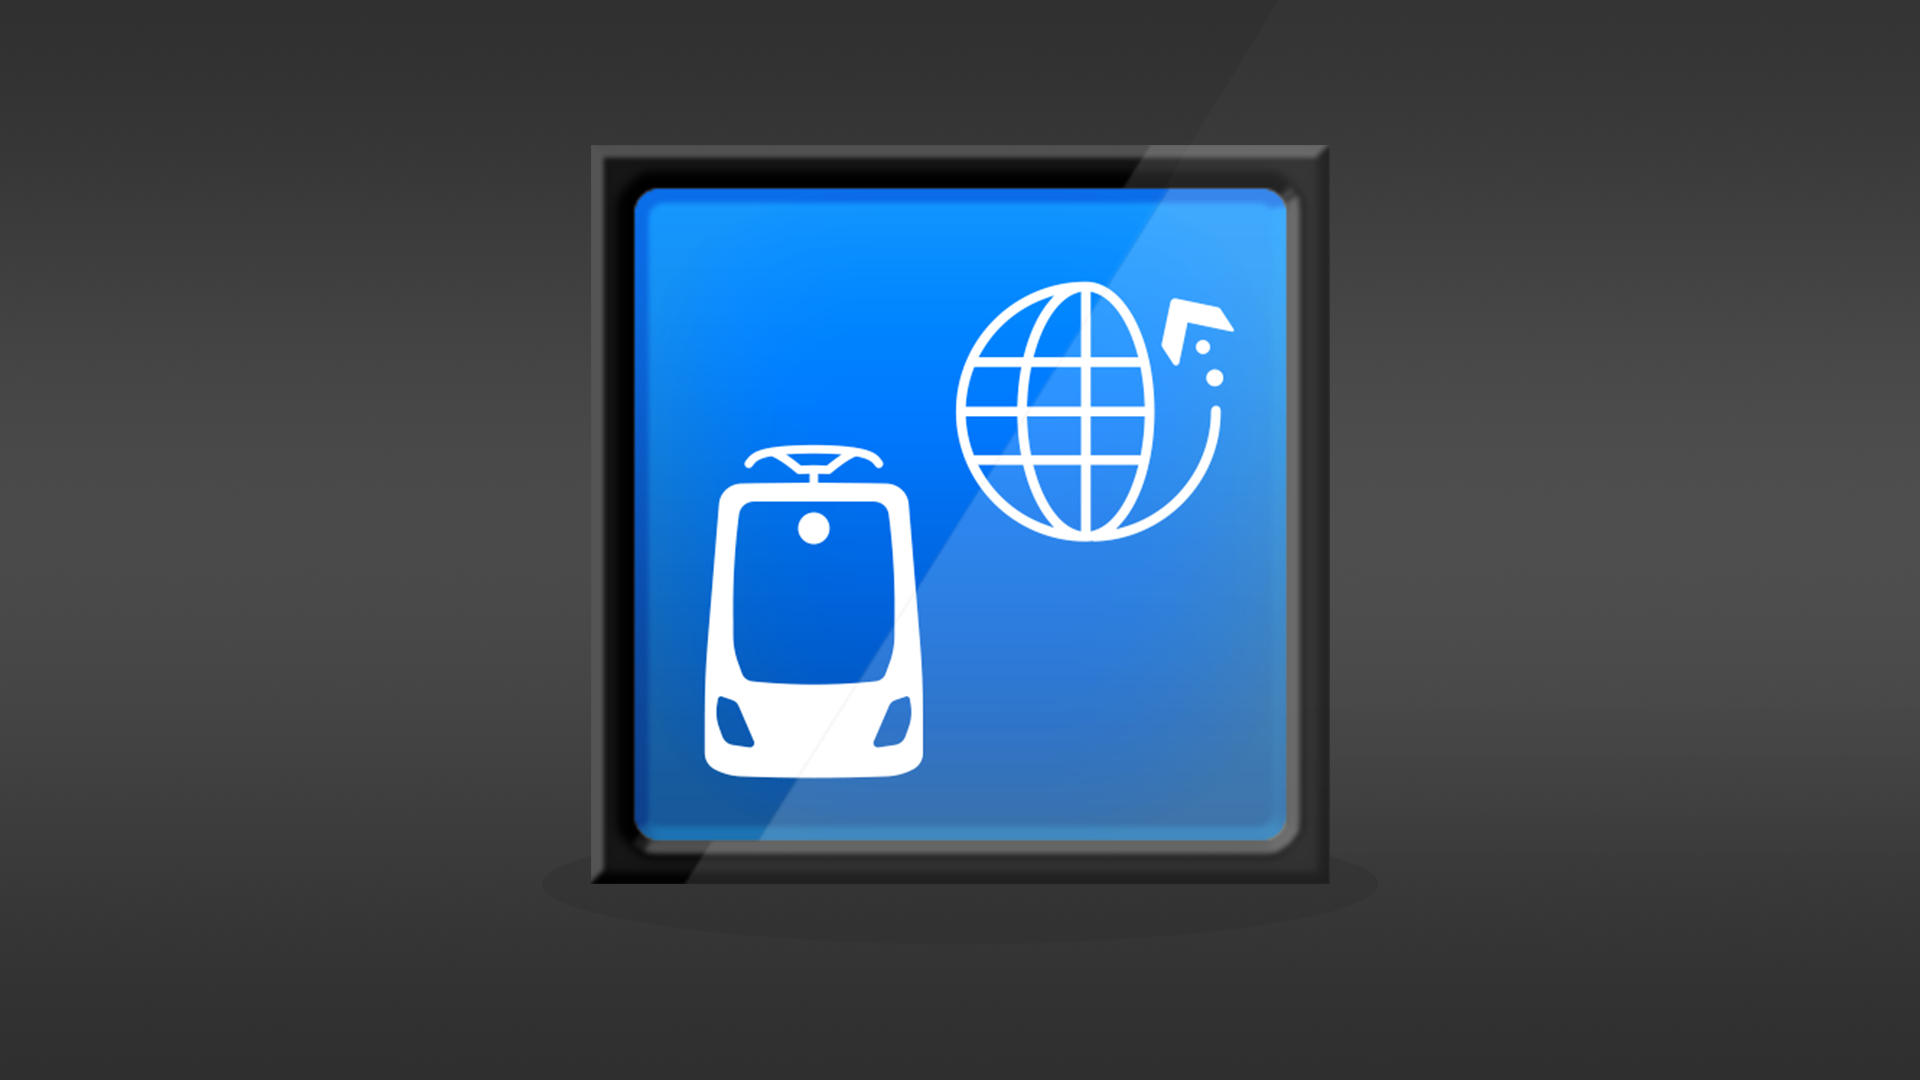 Icon for Around the world